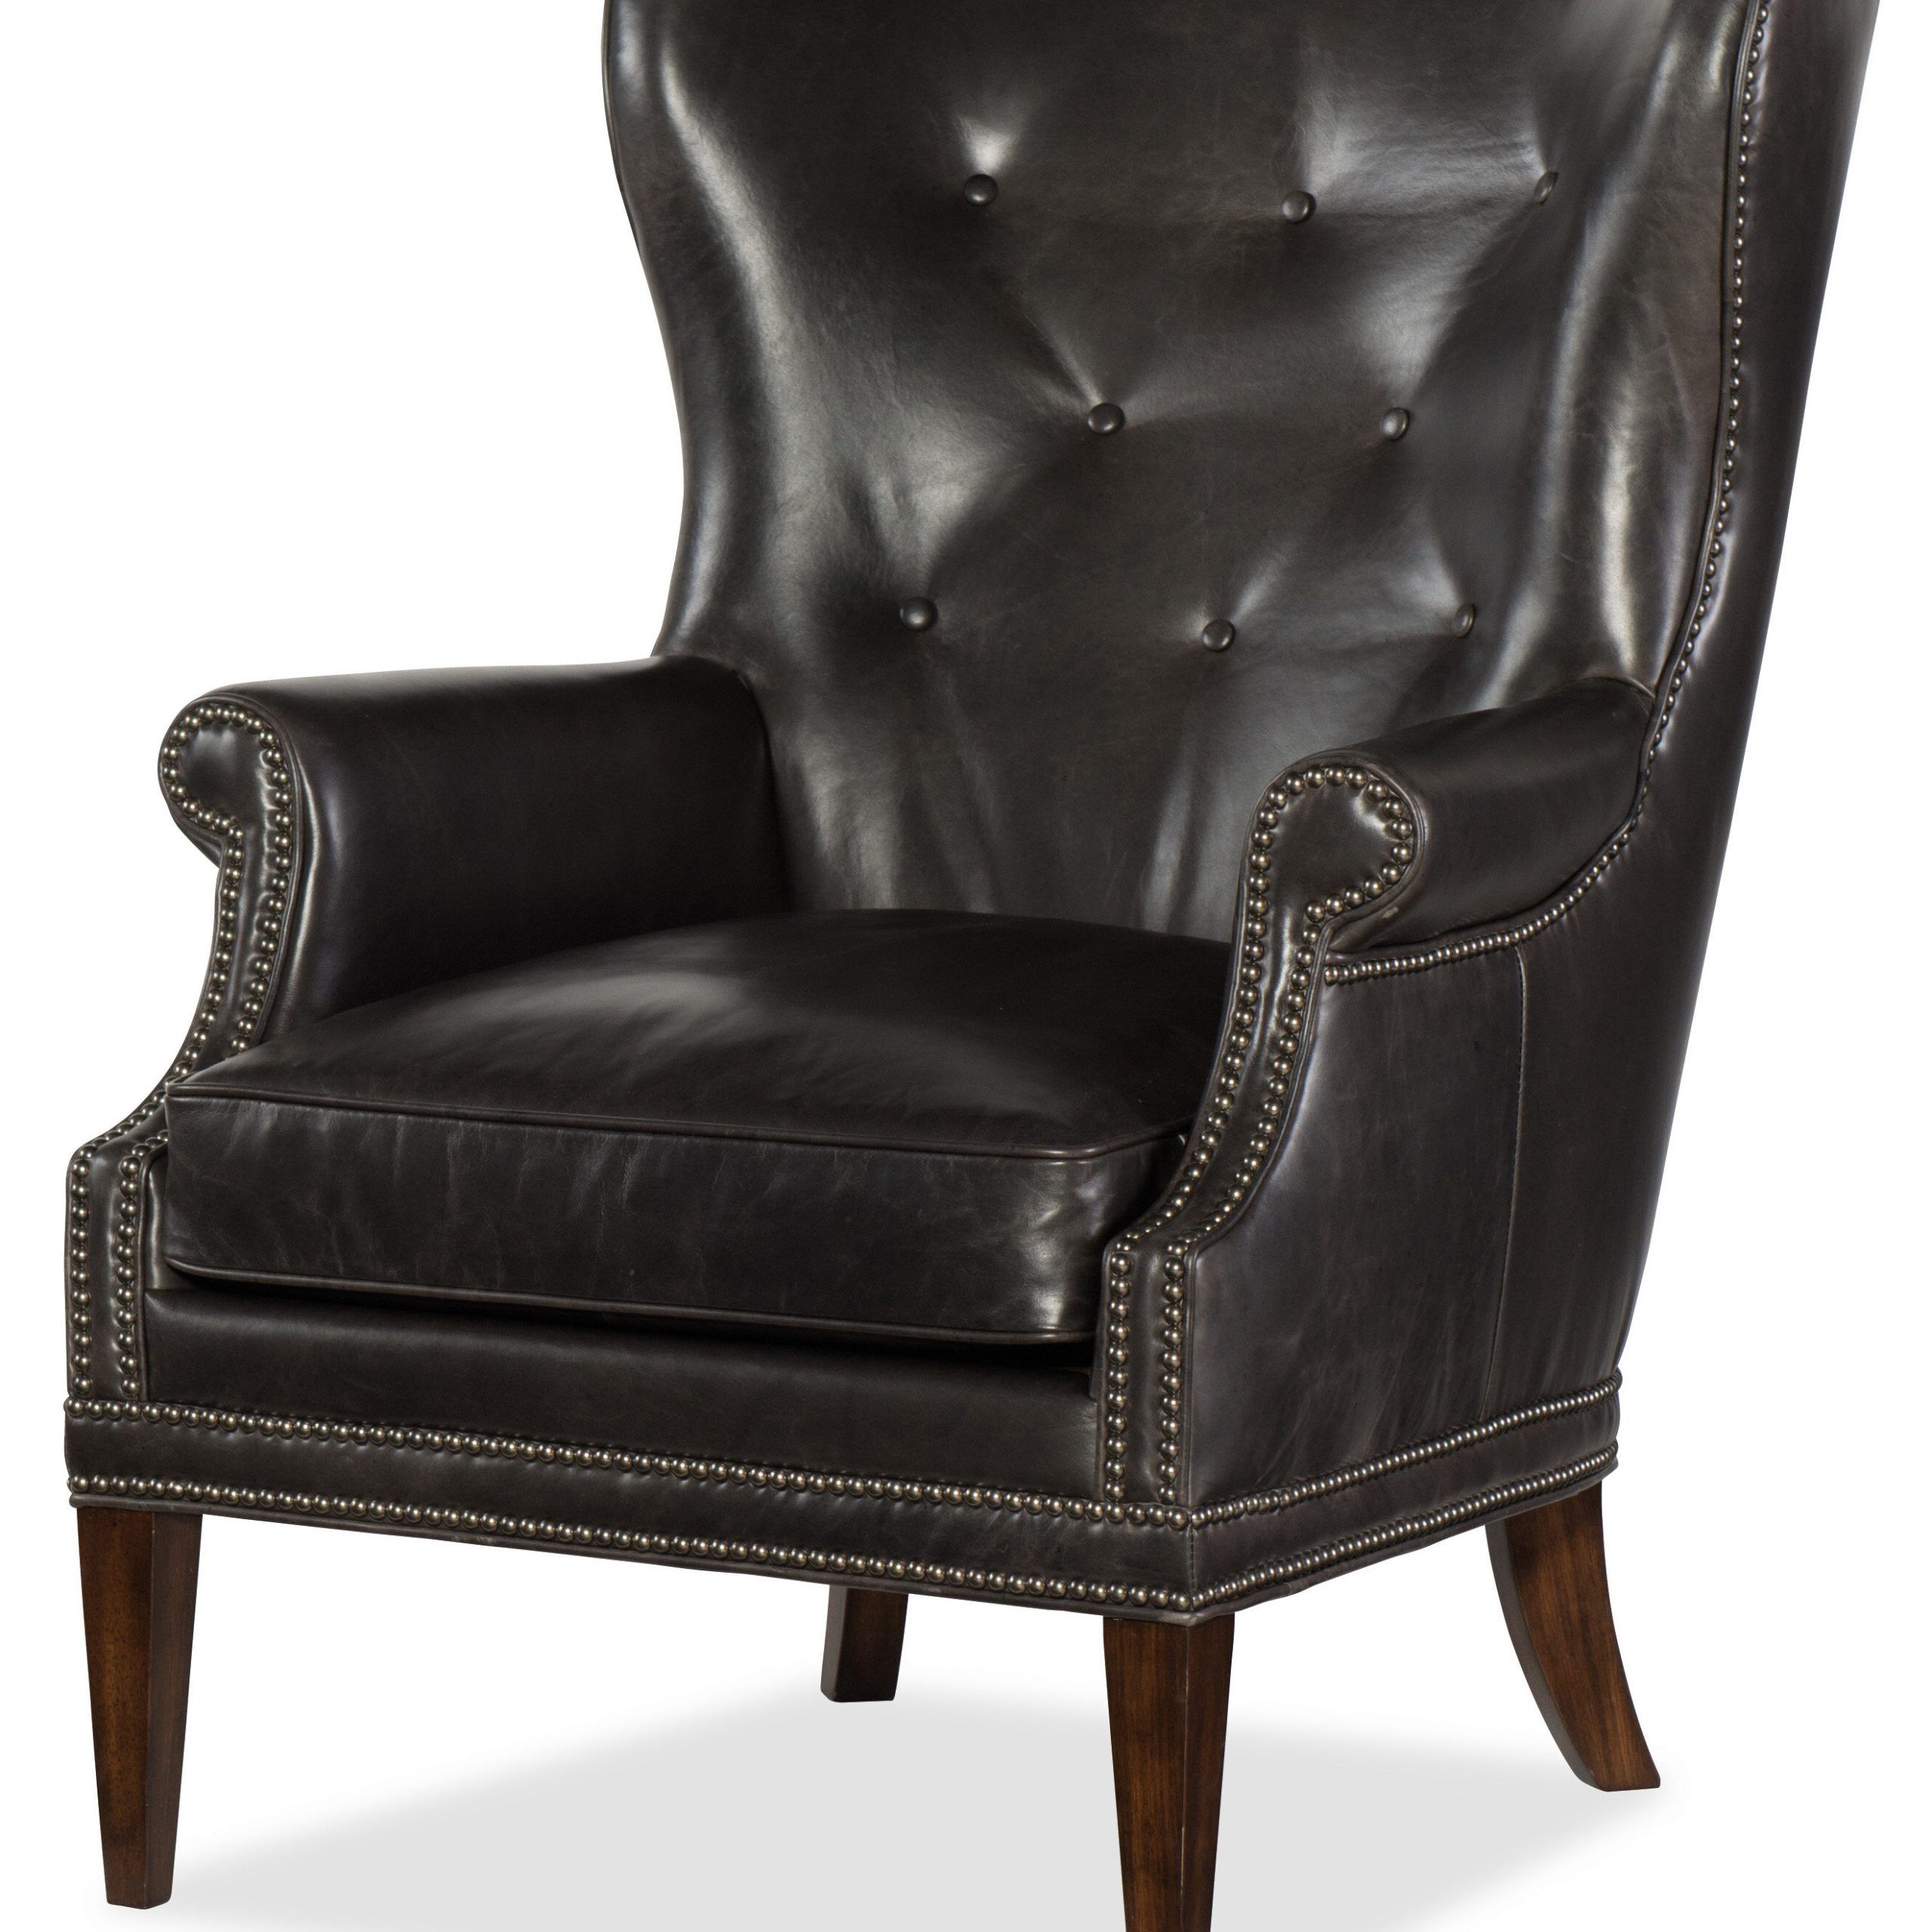 Vineland Polyester Swivel Armchairs Regarding Newest Hooker Furniture Padro Wingback Chair (View 19 of 20)